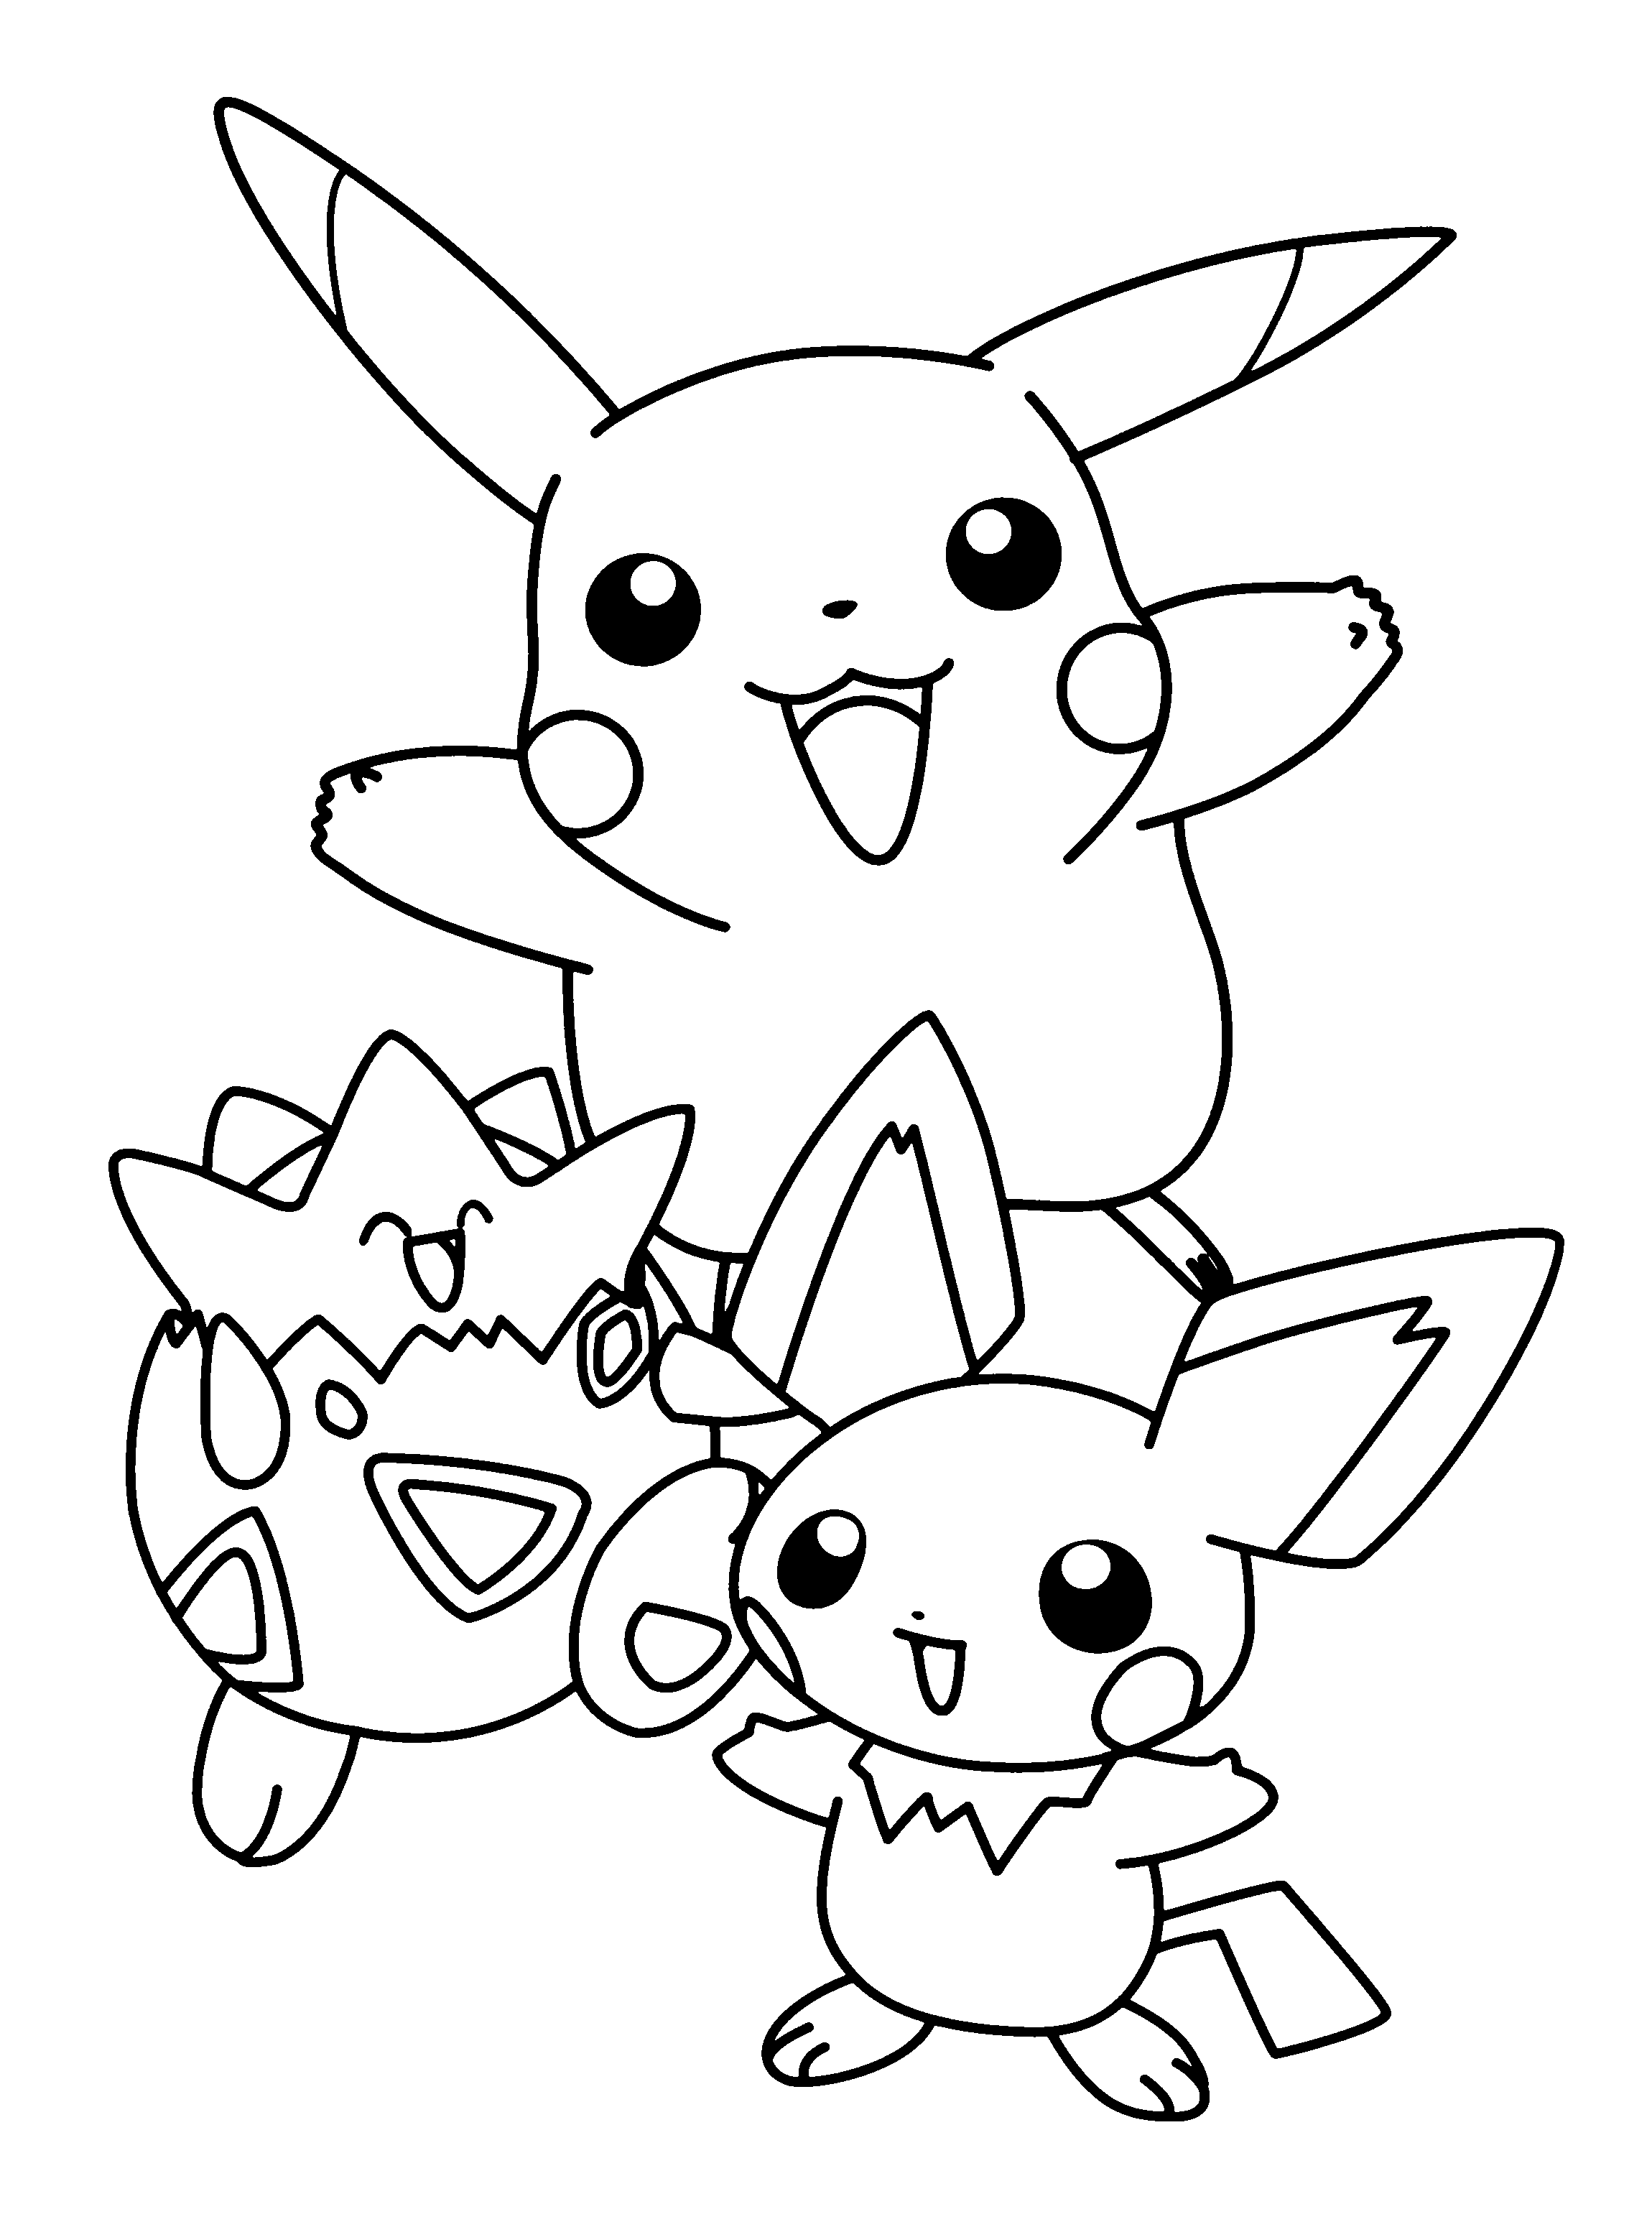 coloring pages for pokemon pokemon coloring pages join your favorite pokemon on an pokemon coloring for pages 